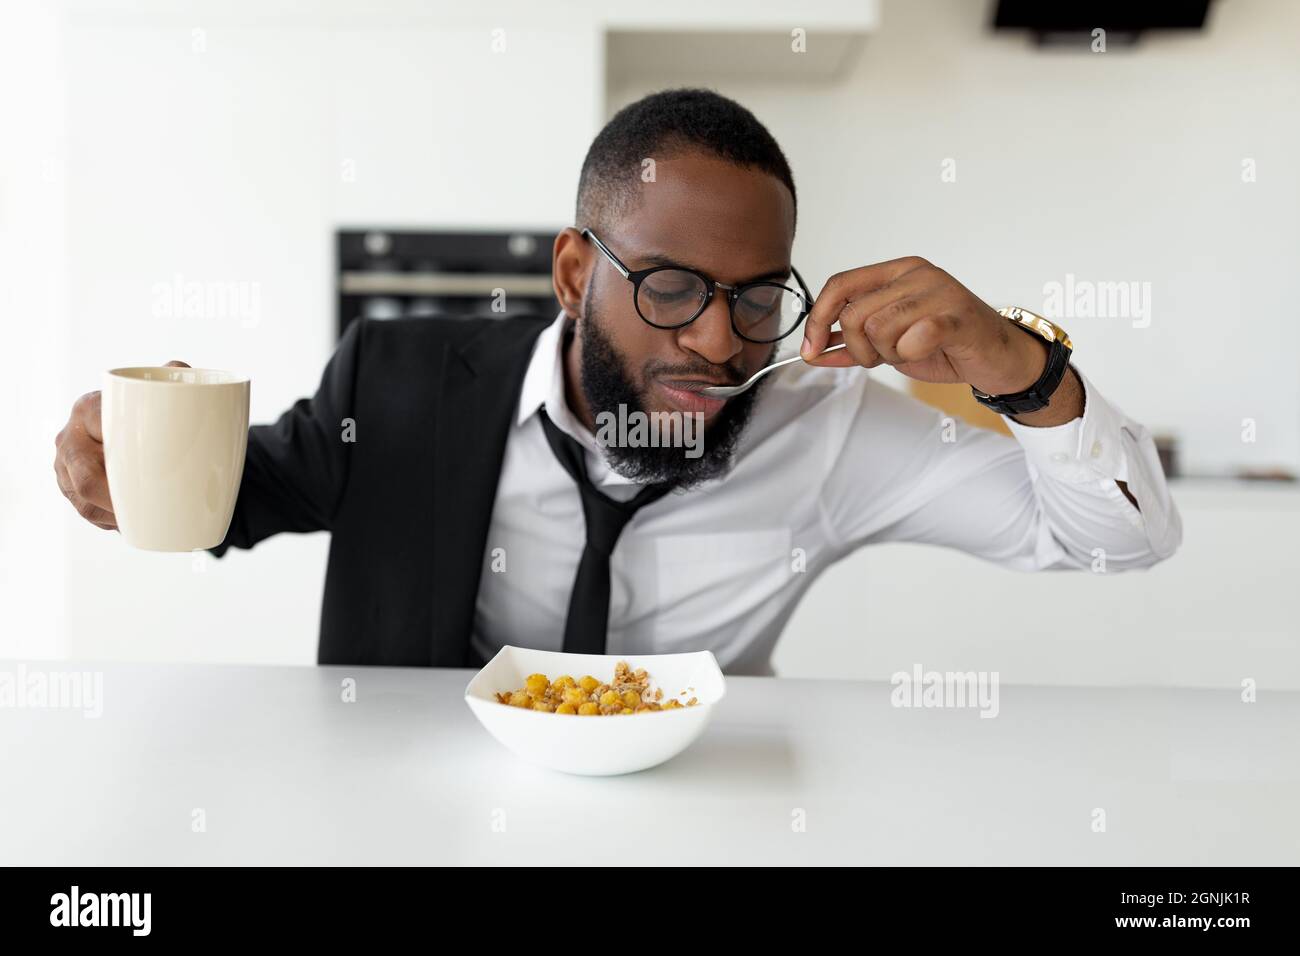 Black man rushing to work eating cereal at home Stock Photo